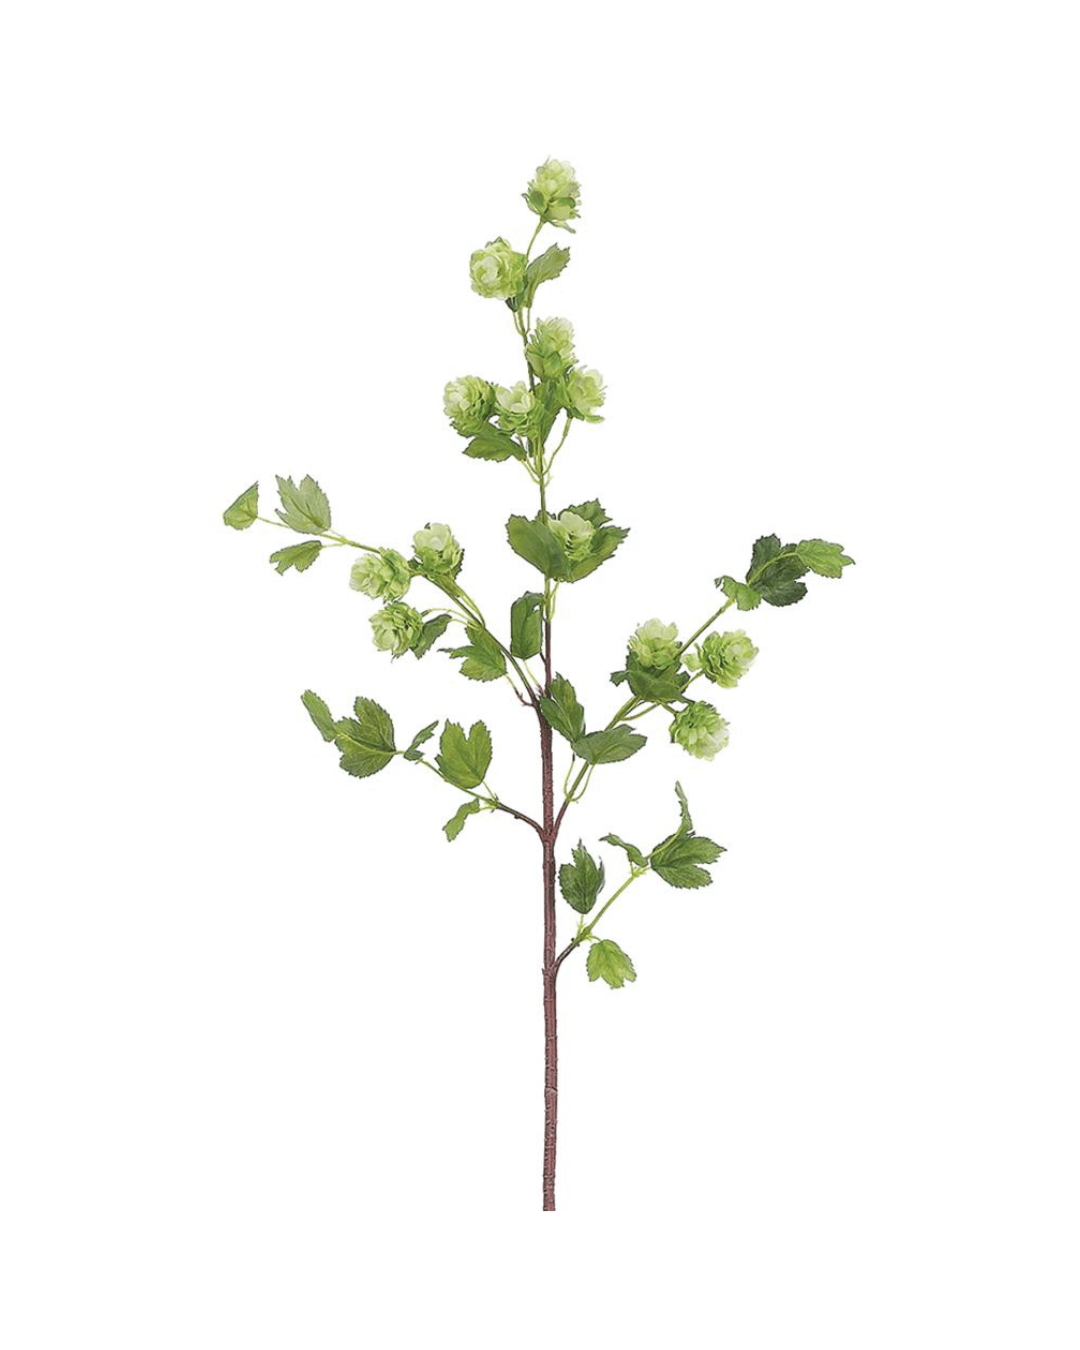 A single, slender tree branch with lush green leaves and clusters of tiny green buds against a plain white background typical of a Scottsdale, Arizona bungalow garden from AllState Floral And Craft&#39;s 36&quot; Hop Spray.